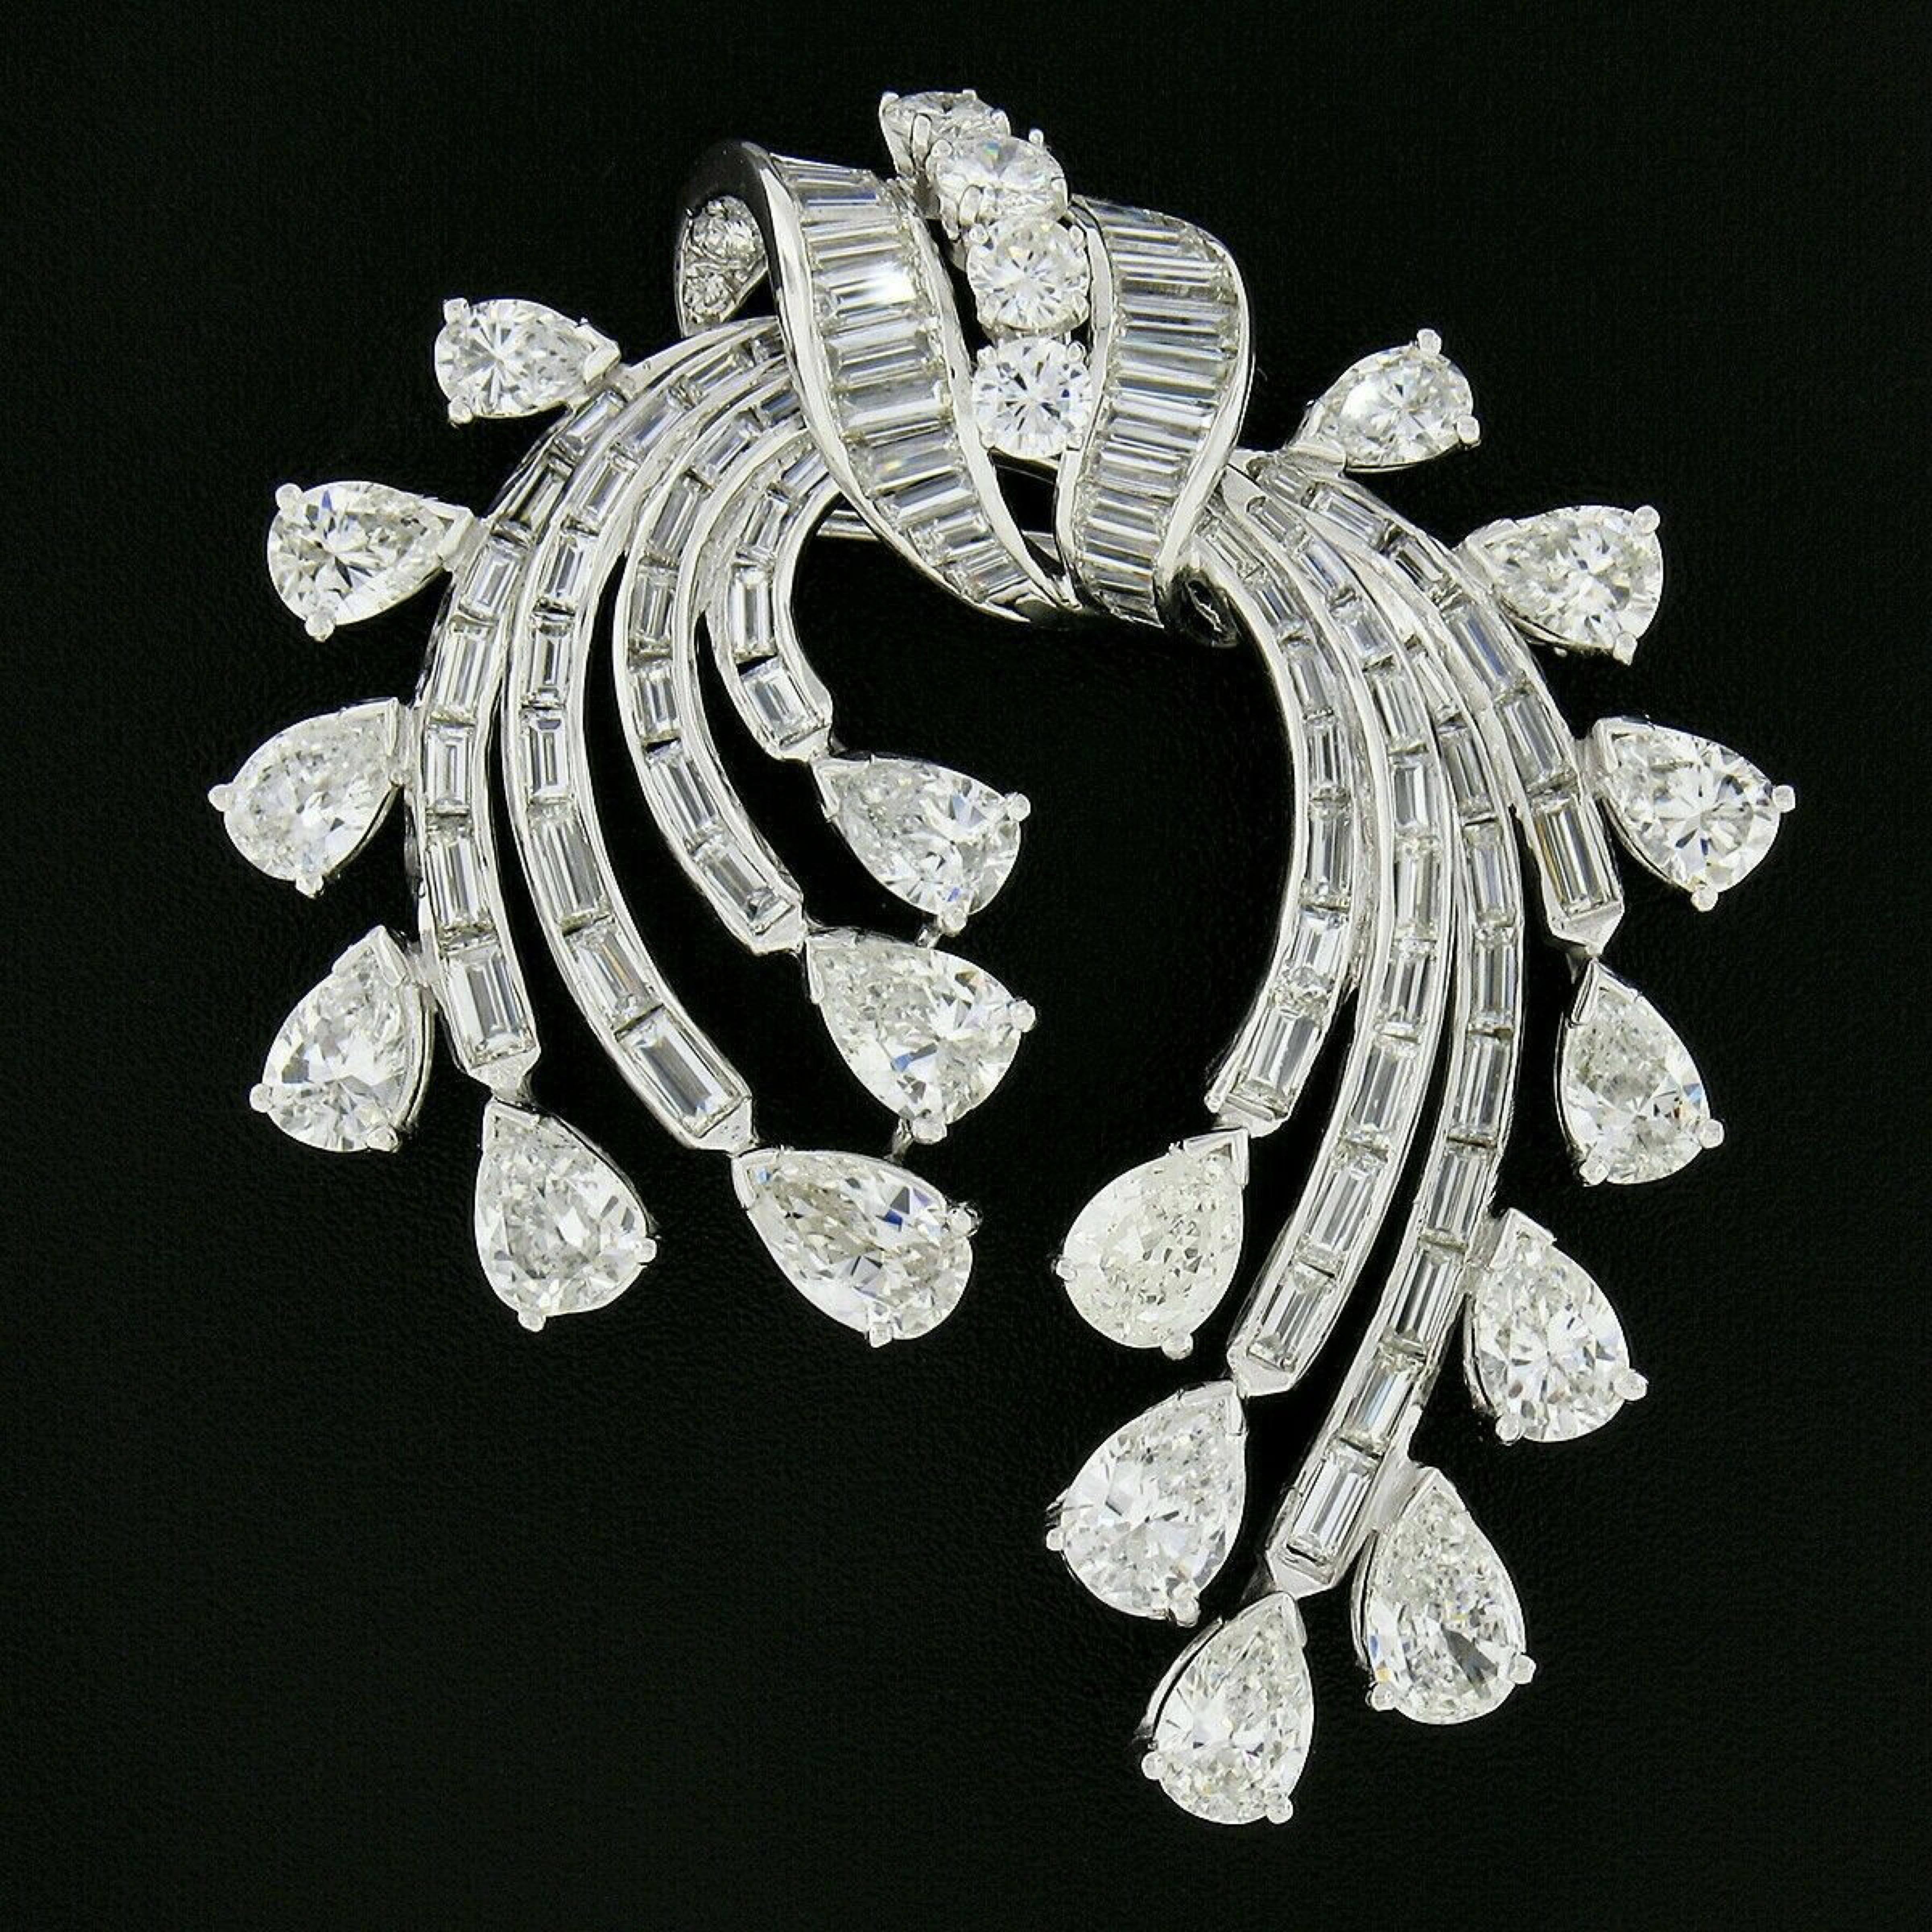 This is a truly jaw dropping vintage statement brooch or pendant that was crafted in platinum during the 1950s and is drenched with approximately 13.65 carats of very fine quality diamonds throughout. It features multiple branches of baguette